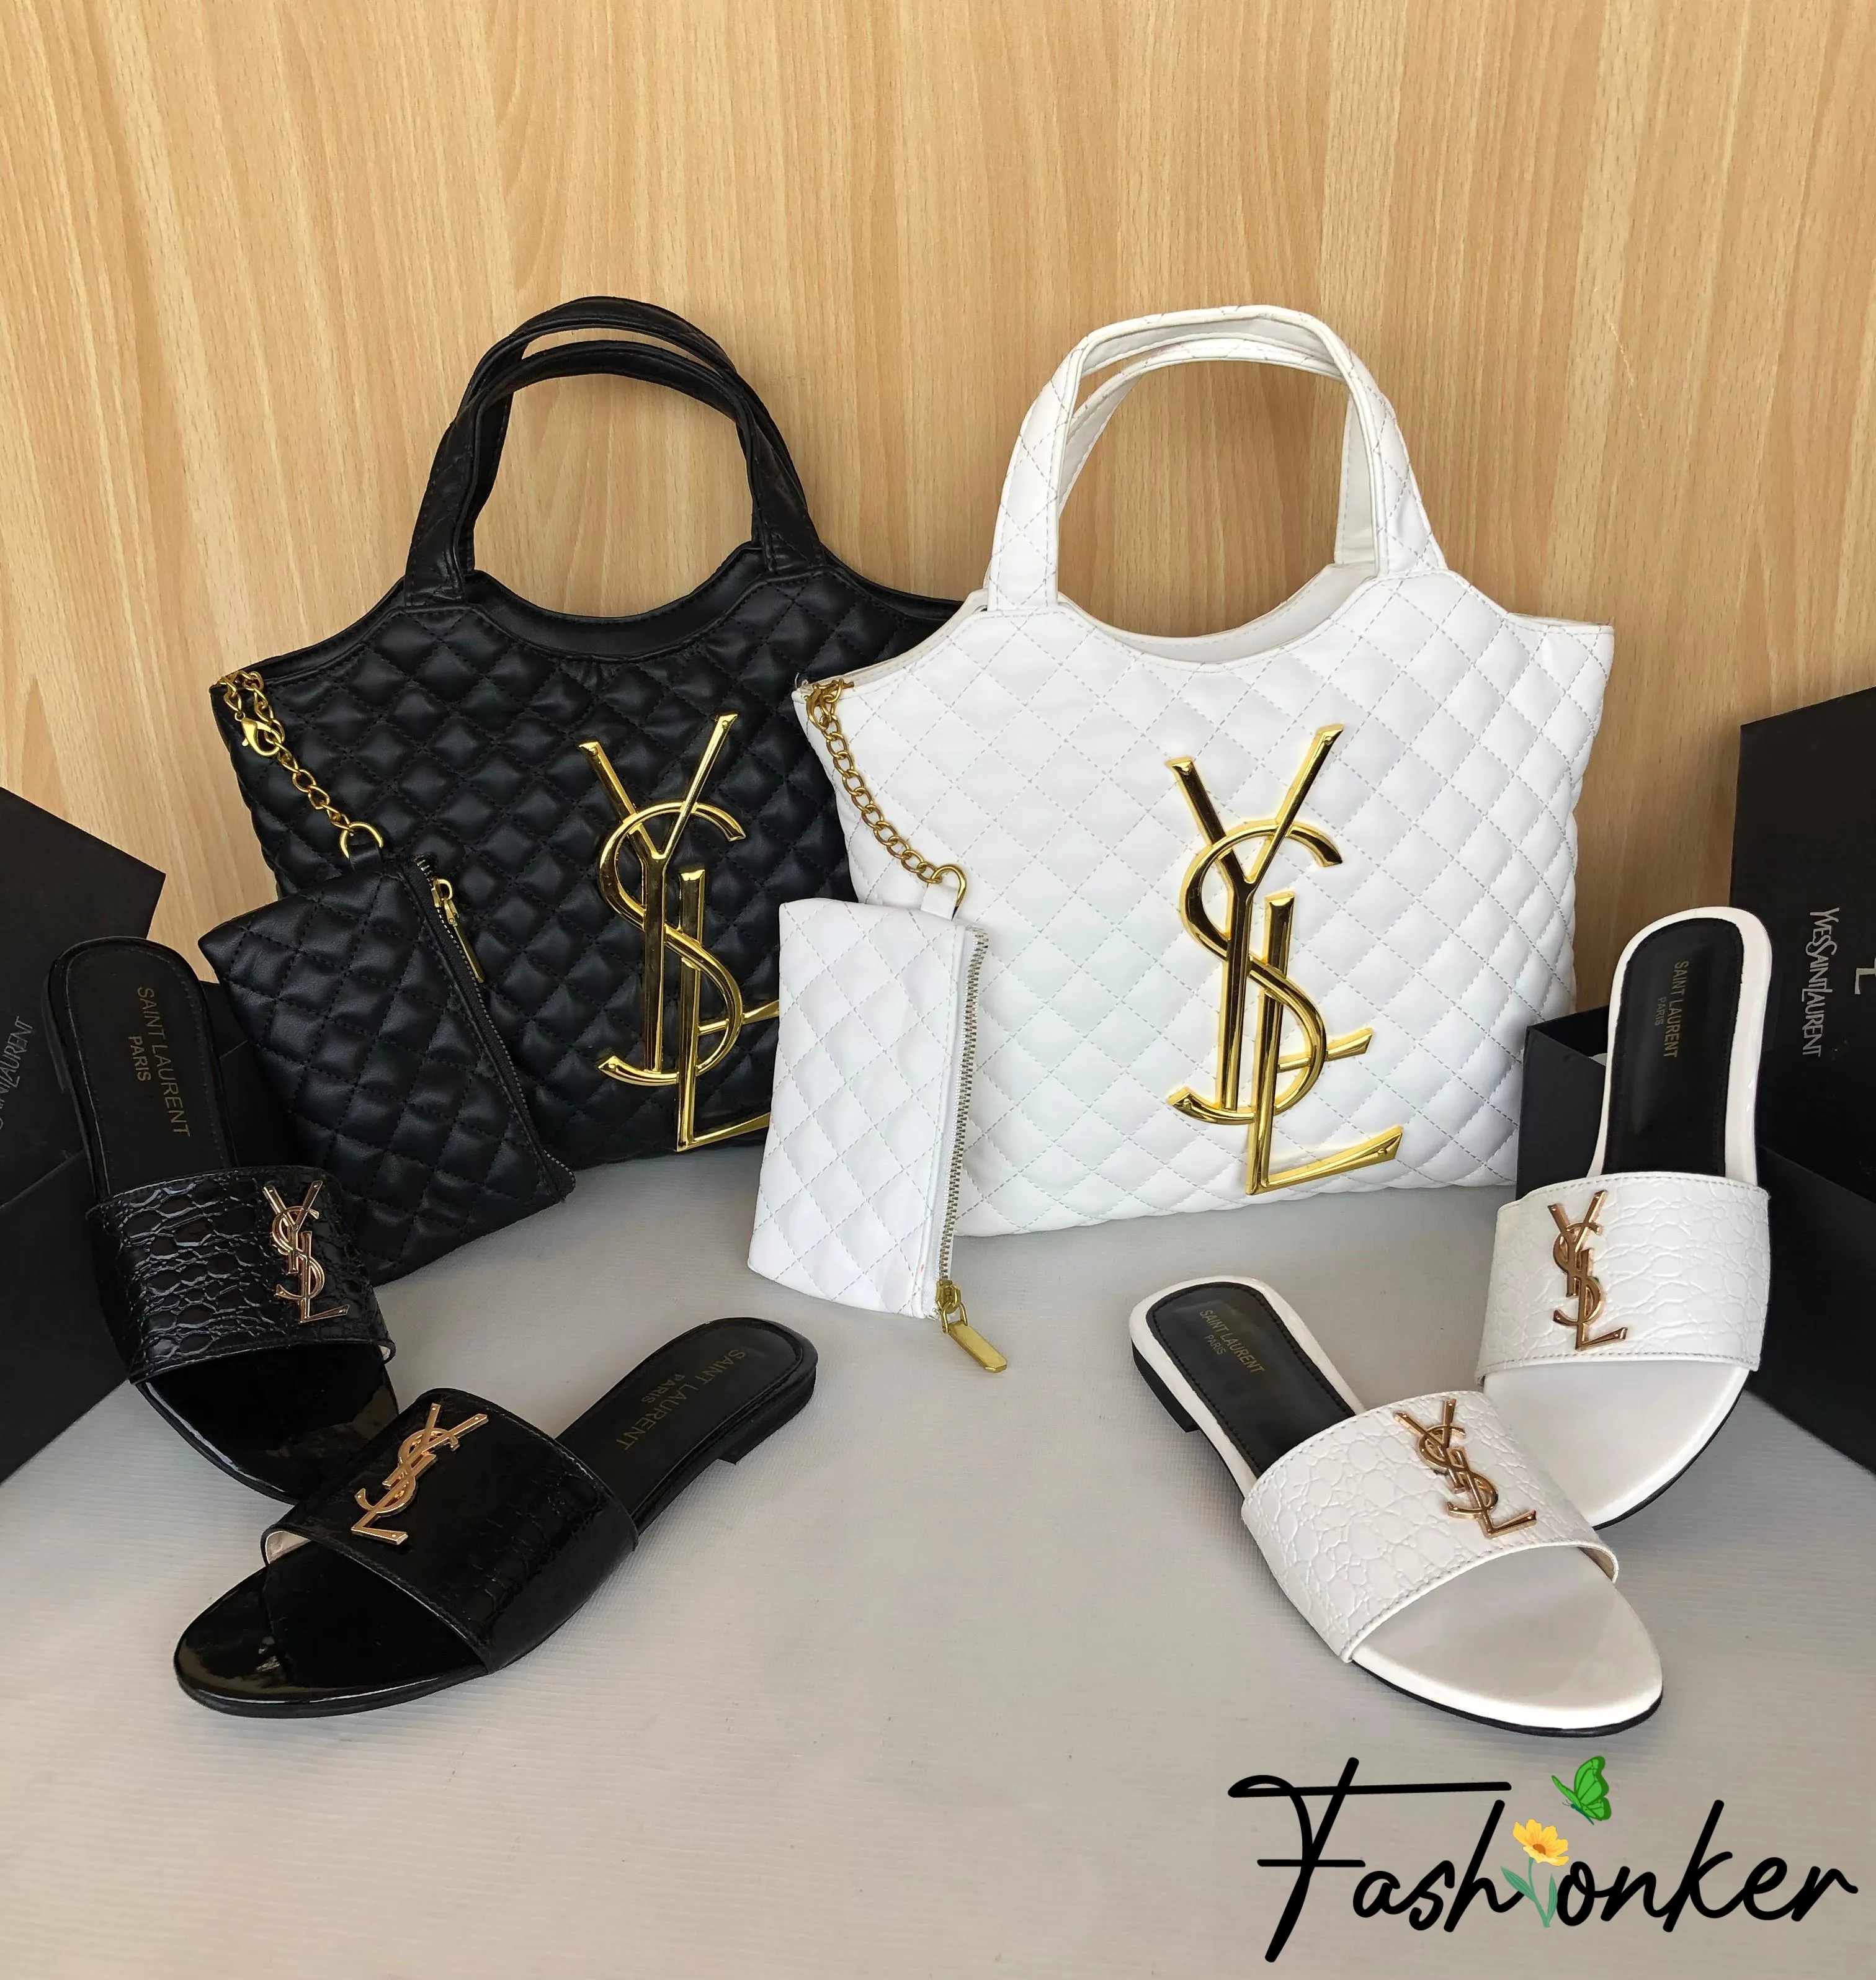 Best Price Ysl Combo Deal